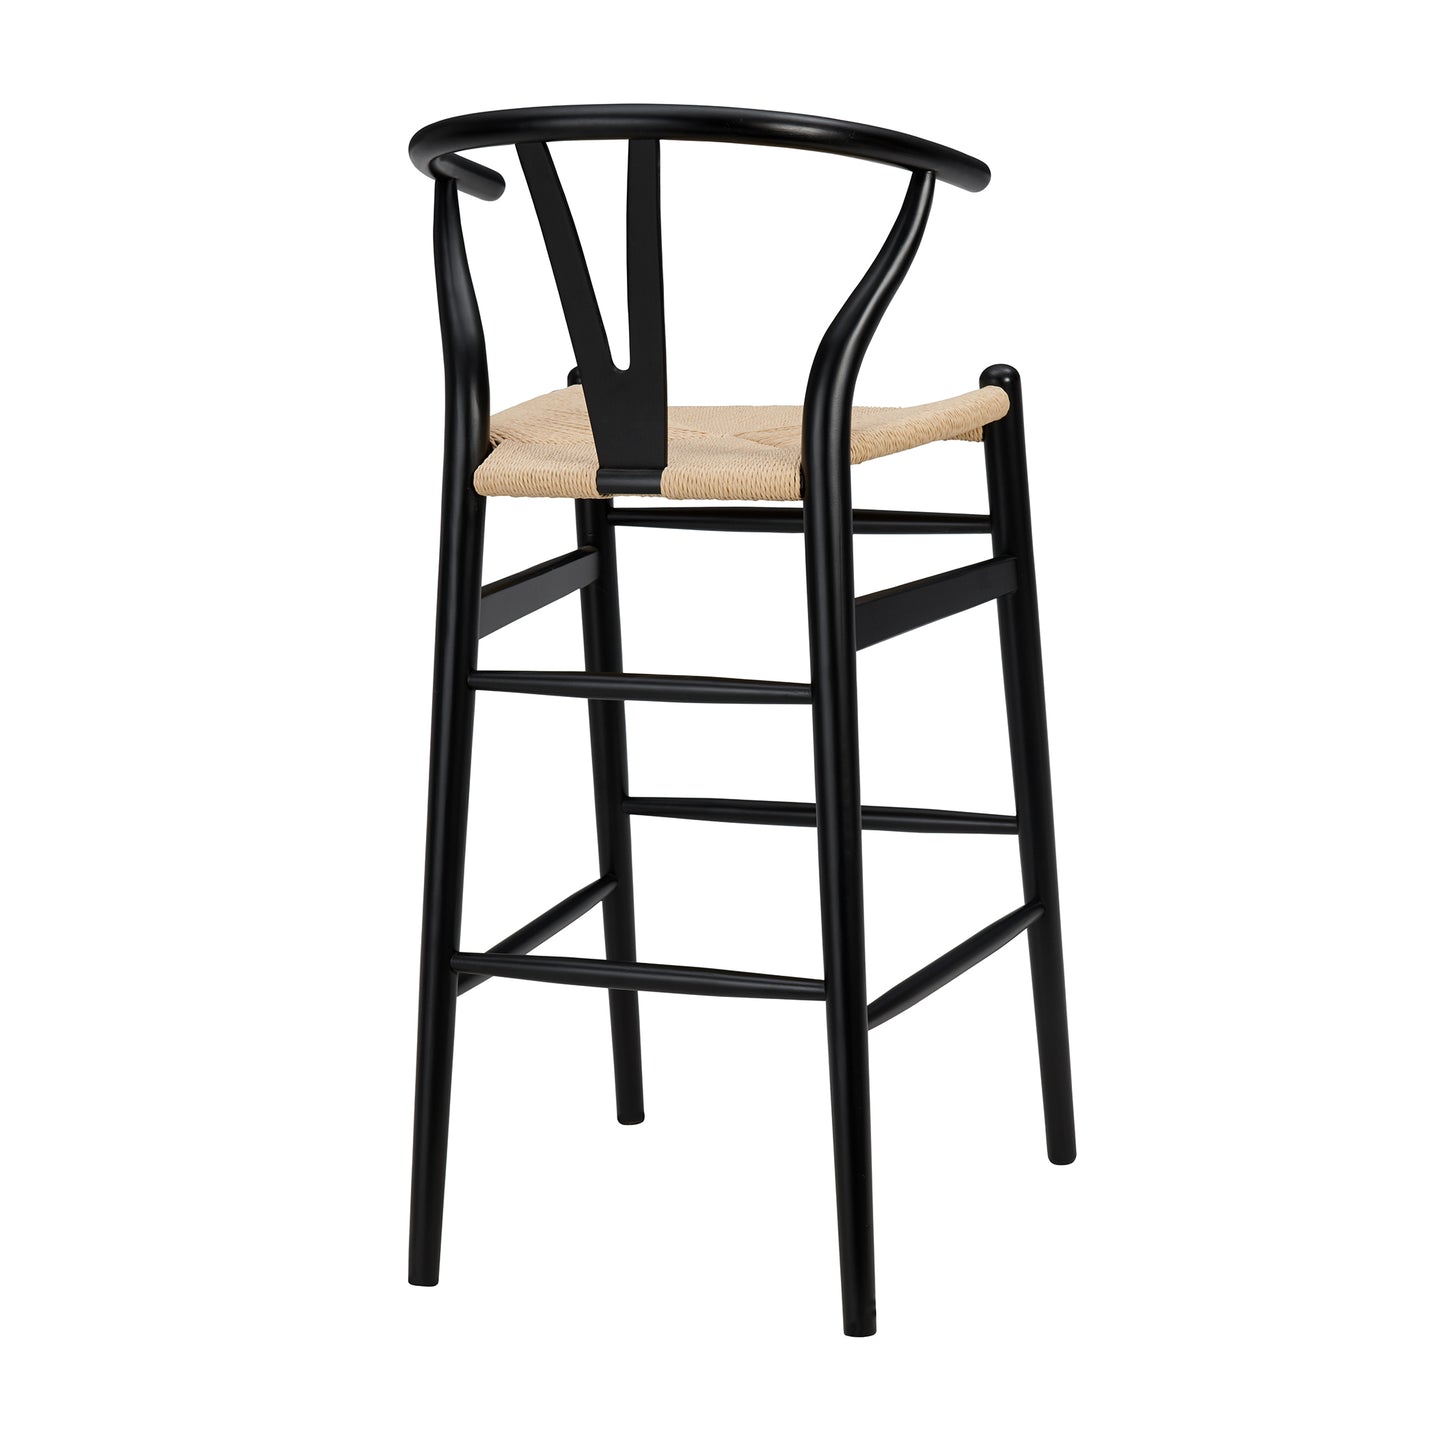 Evelina Bar Stool in Black Frame and Natural Seat - Set of 1